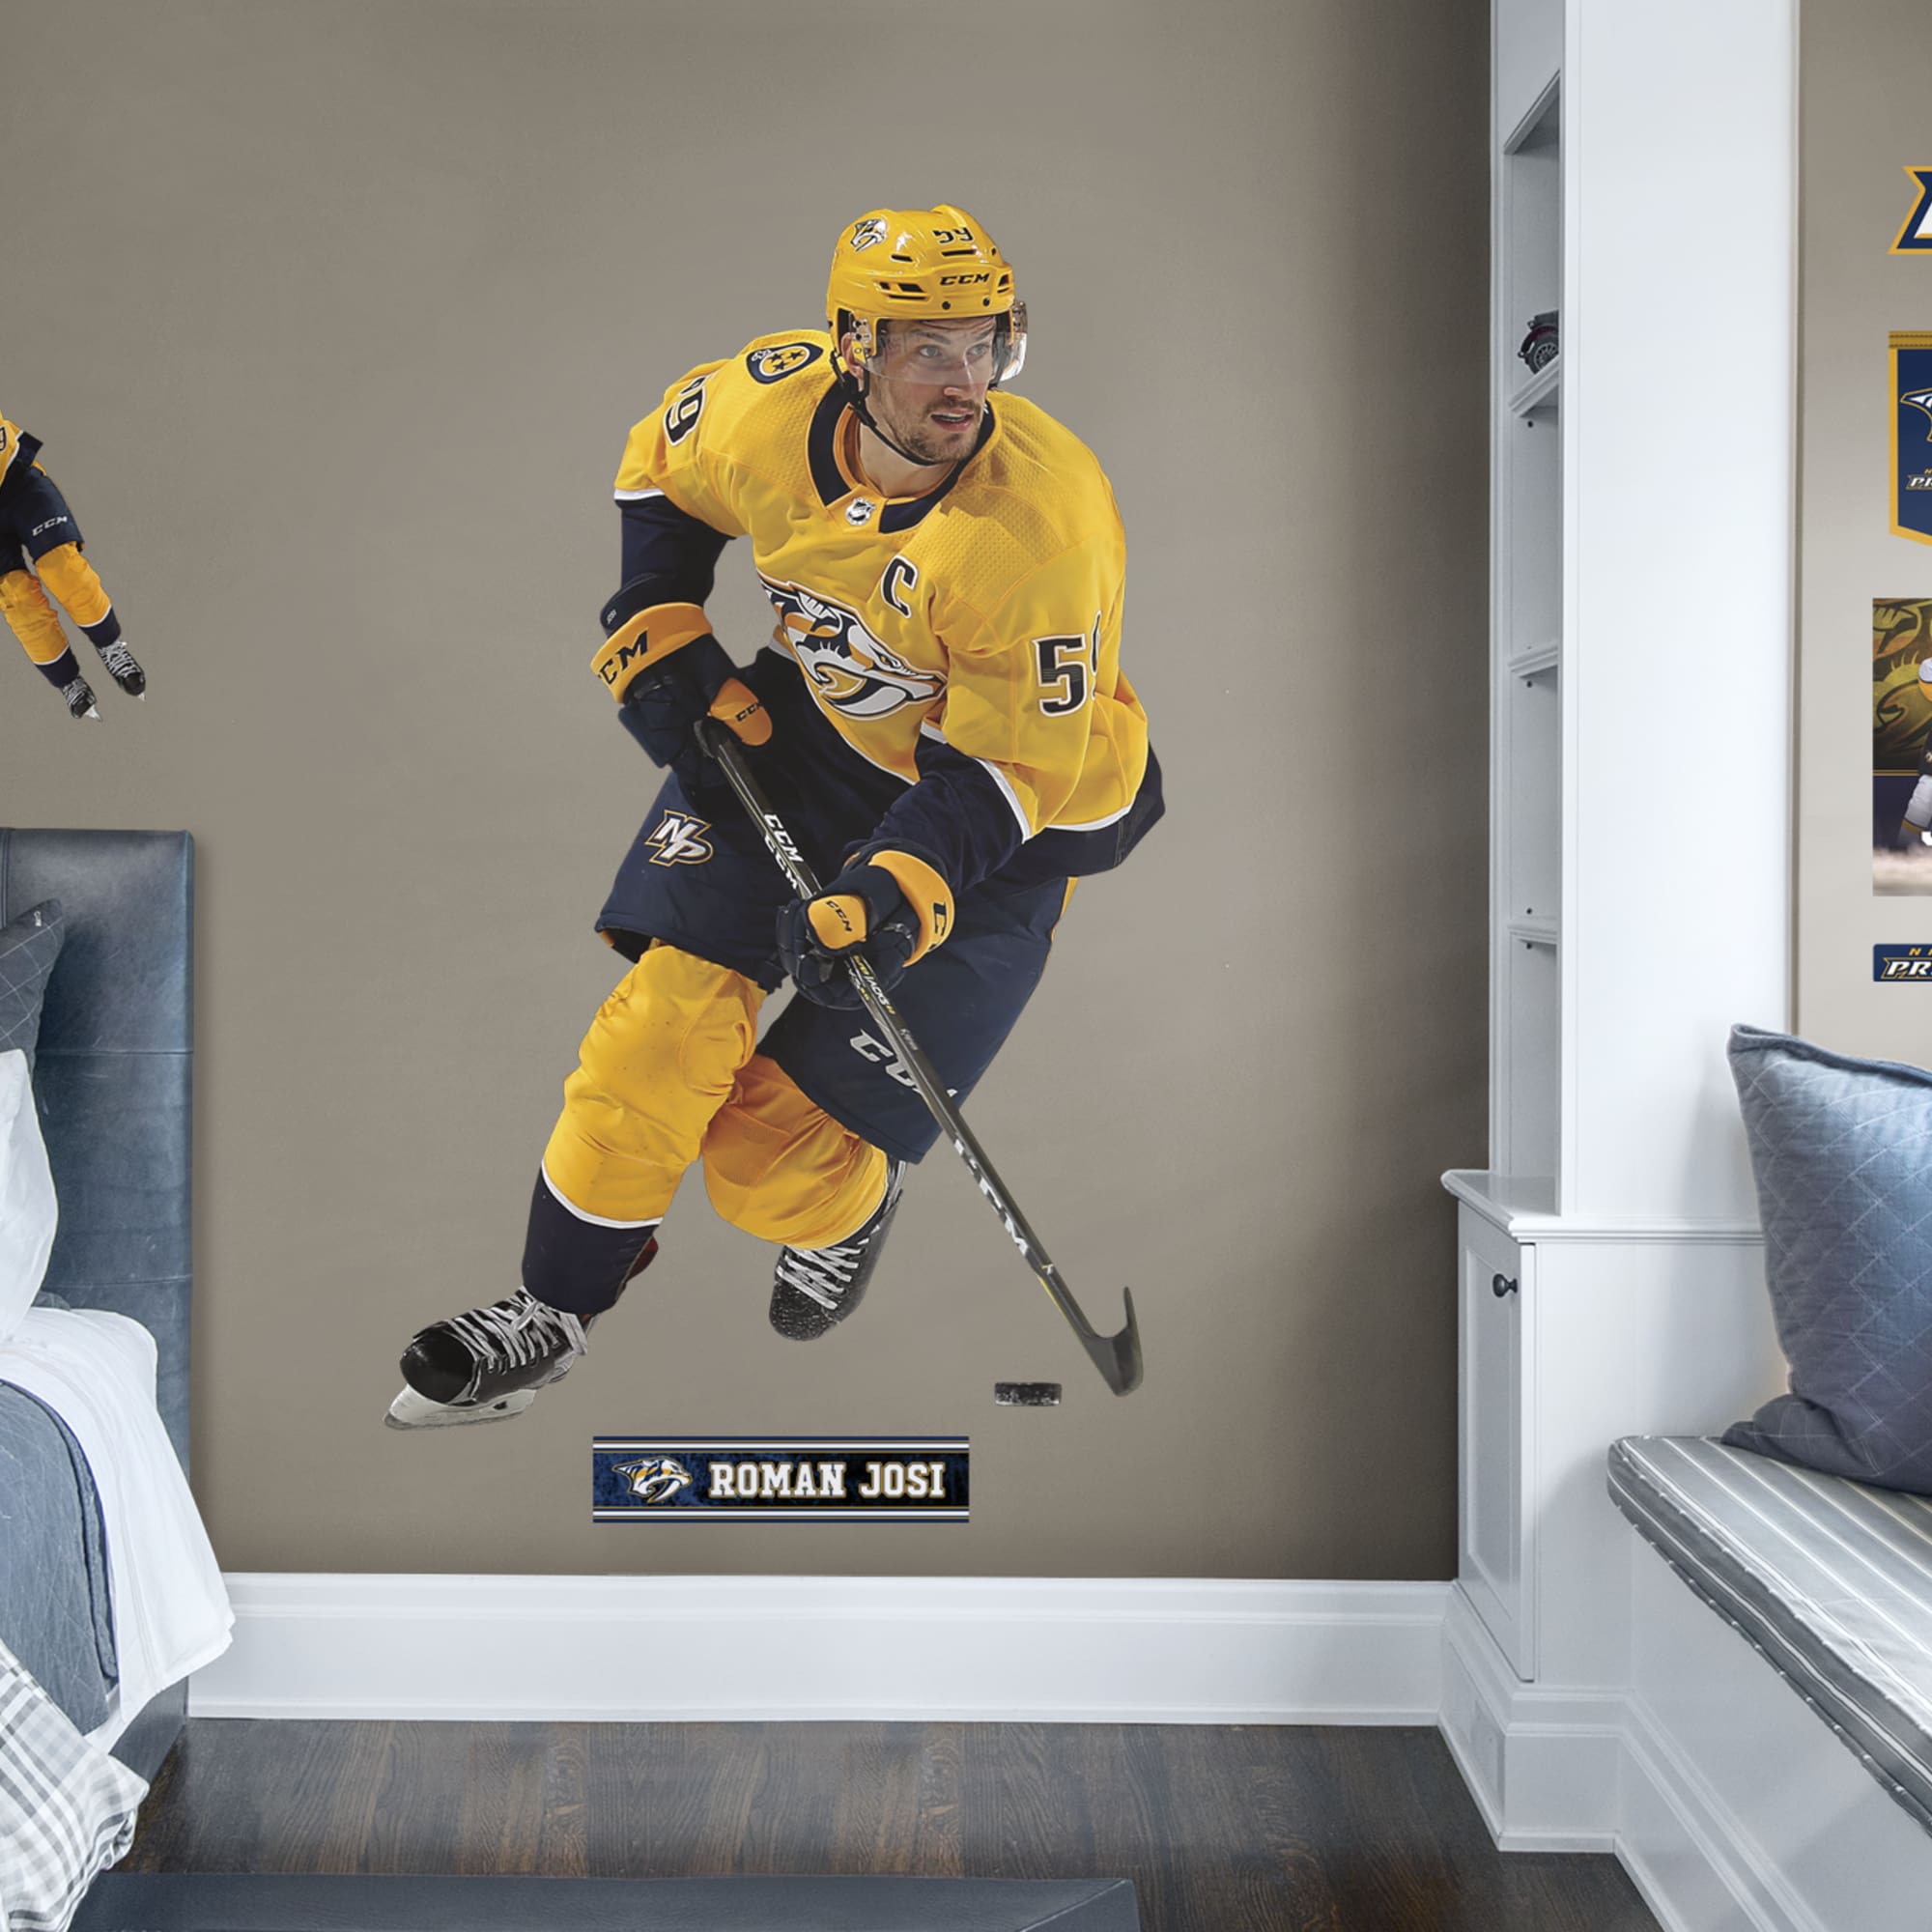 Roman Josi for Nashville Predators - Officially Licensed NHL Removable Wall Decal Life-Size Athlete + 9 Decals (48"W x 75"H) by